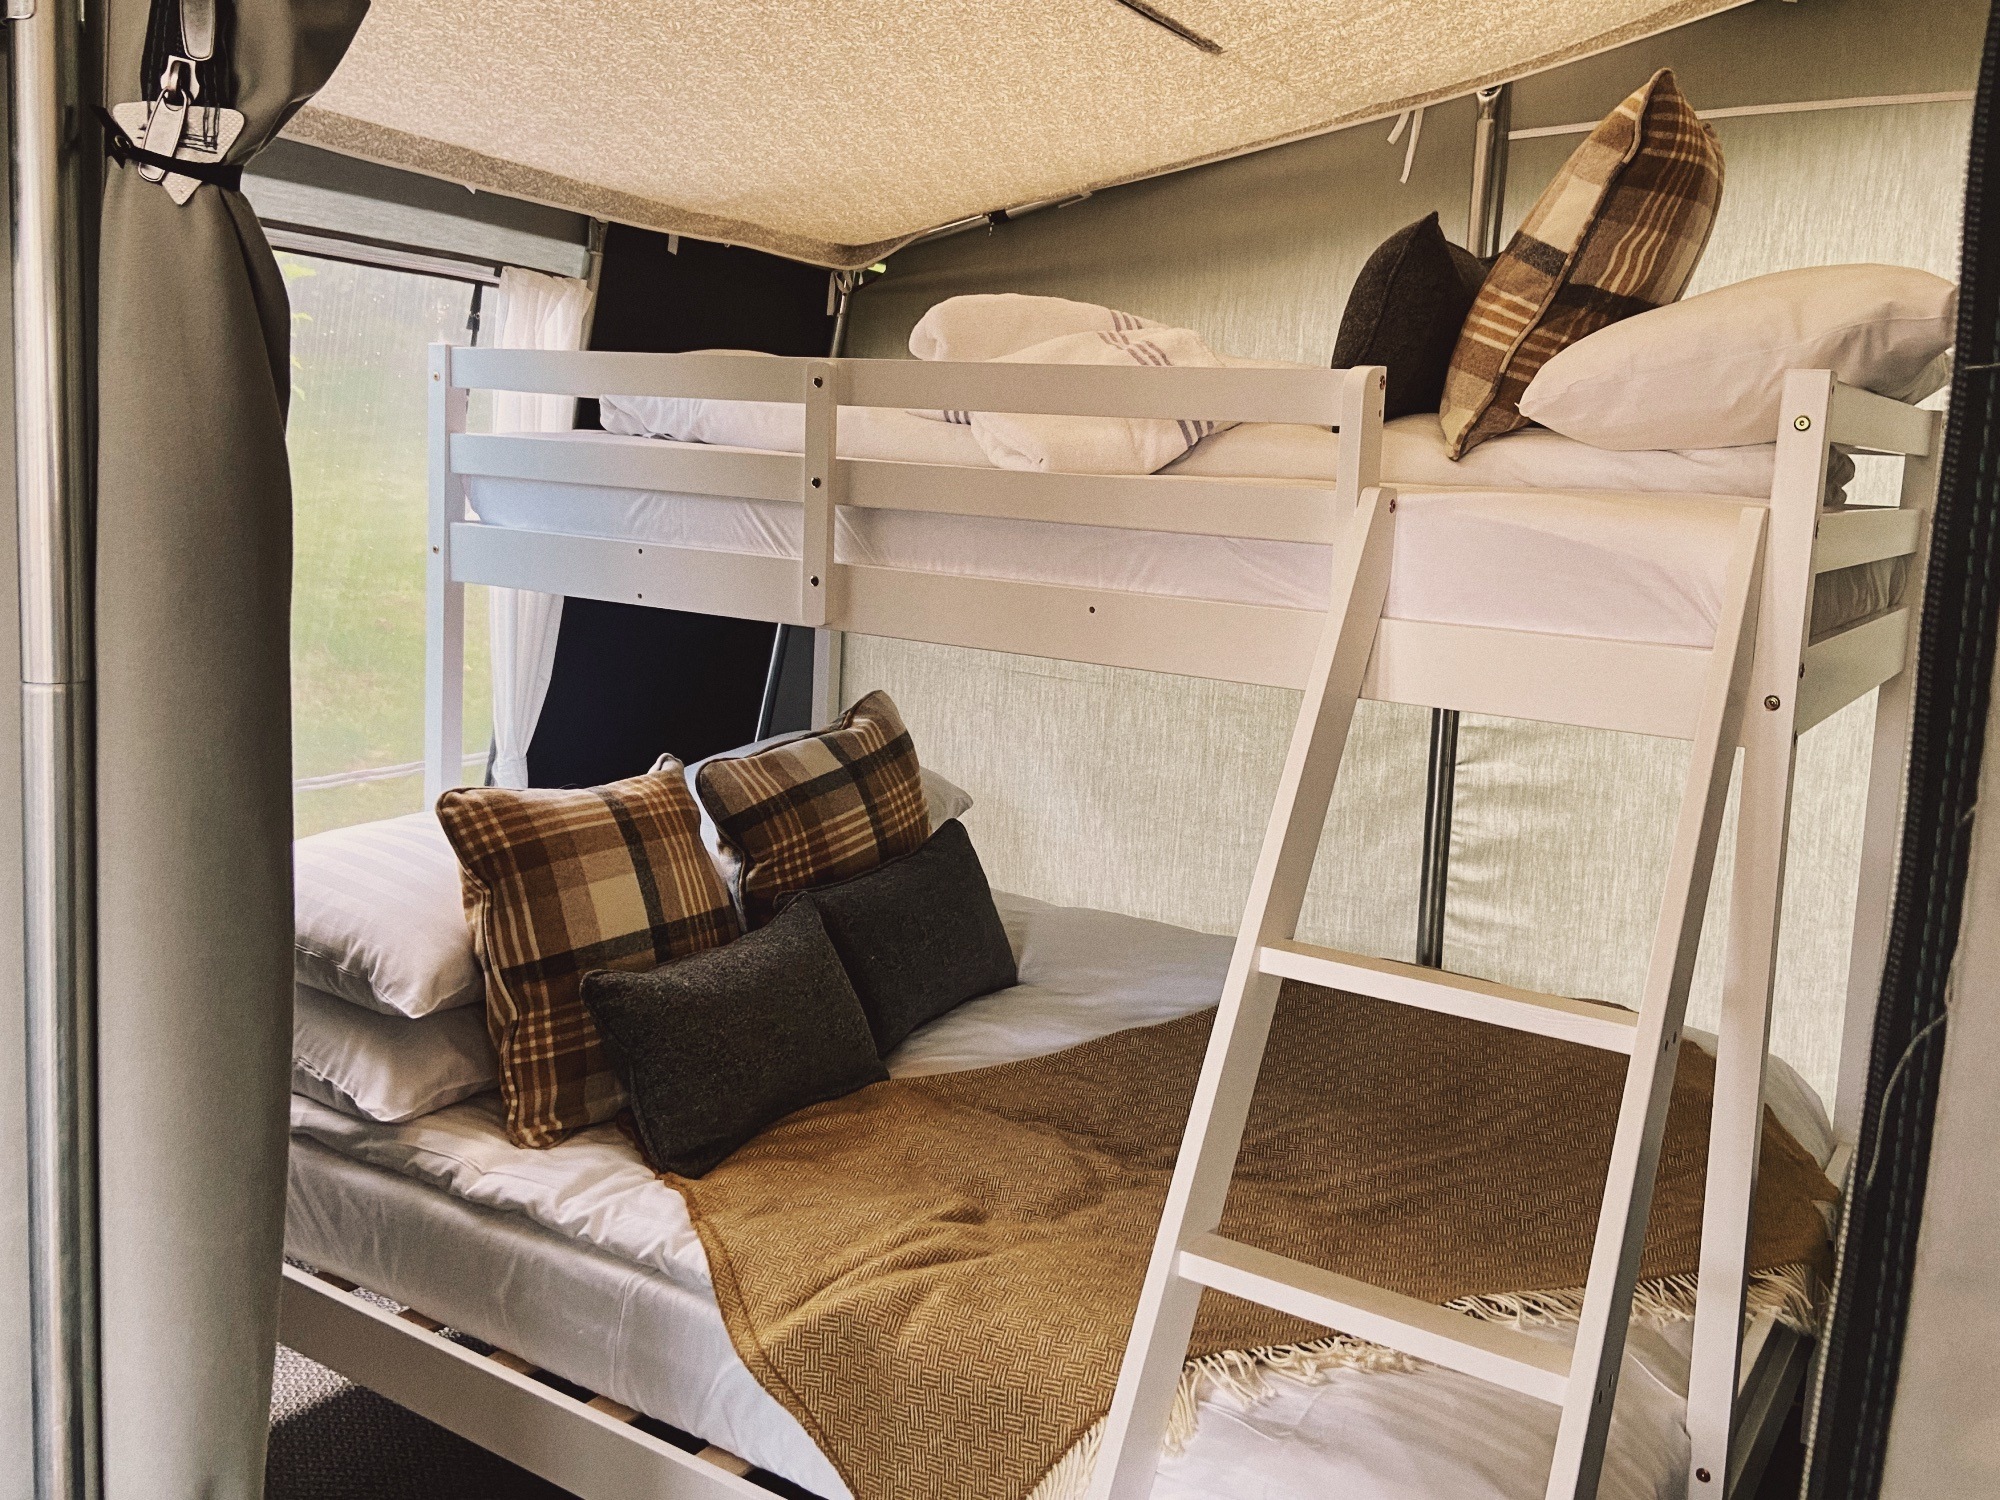 The triple bunk bed